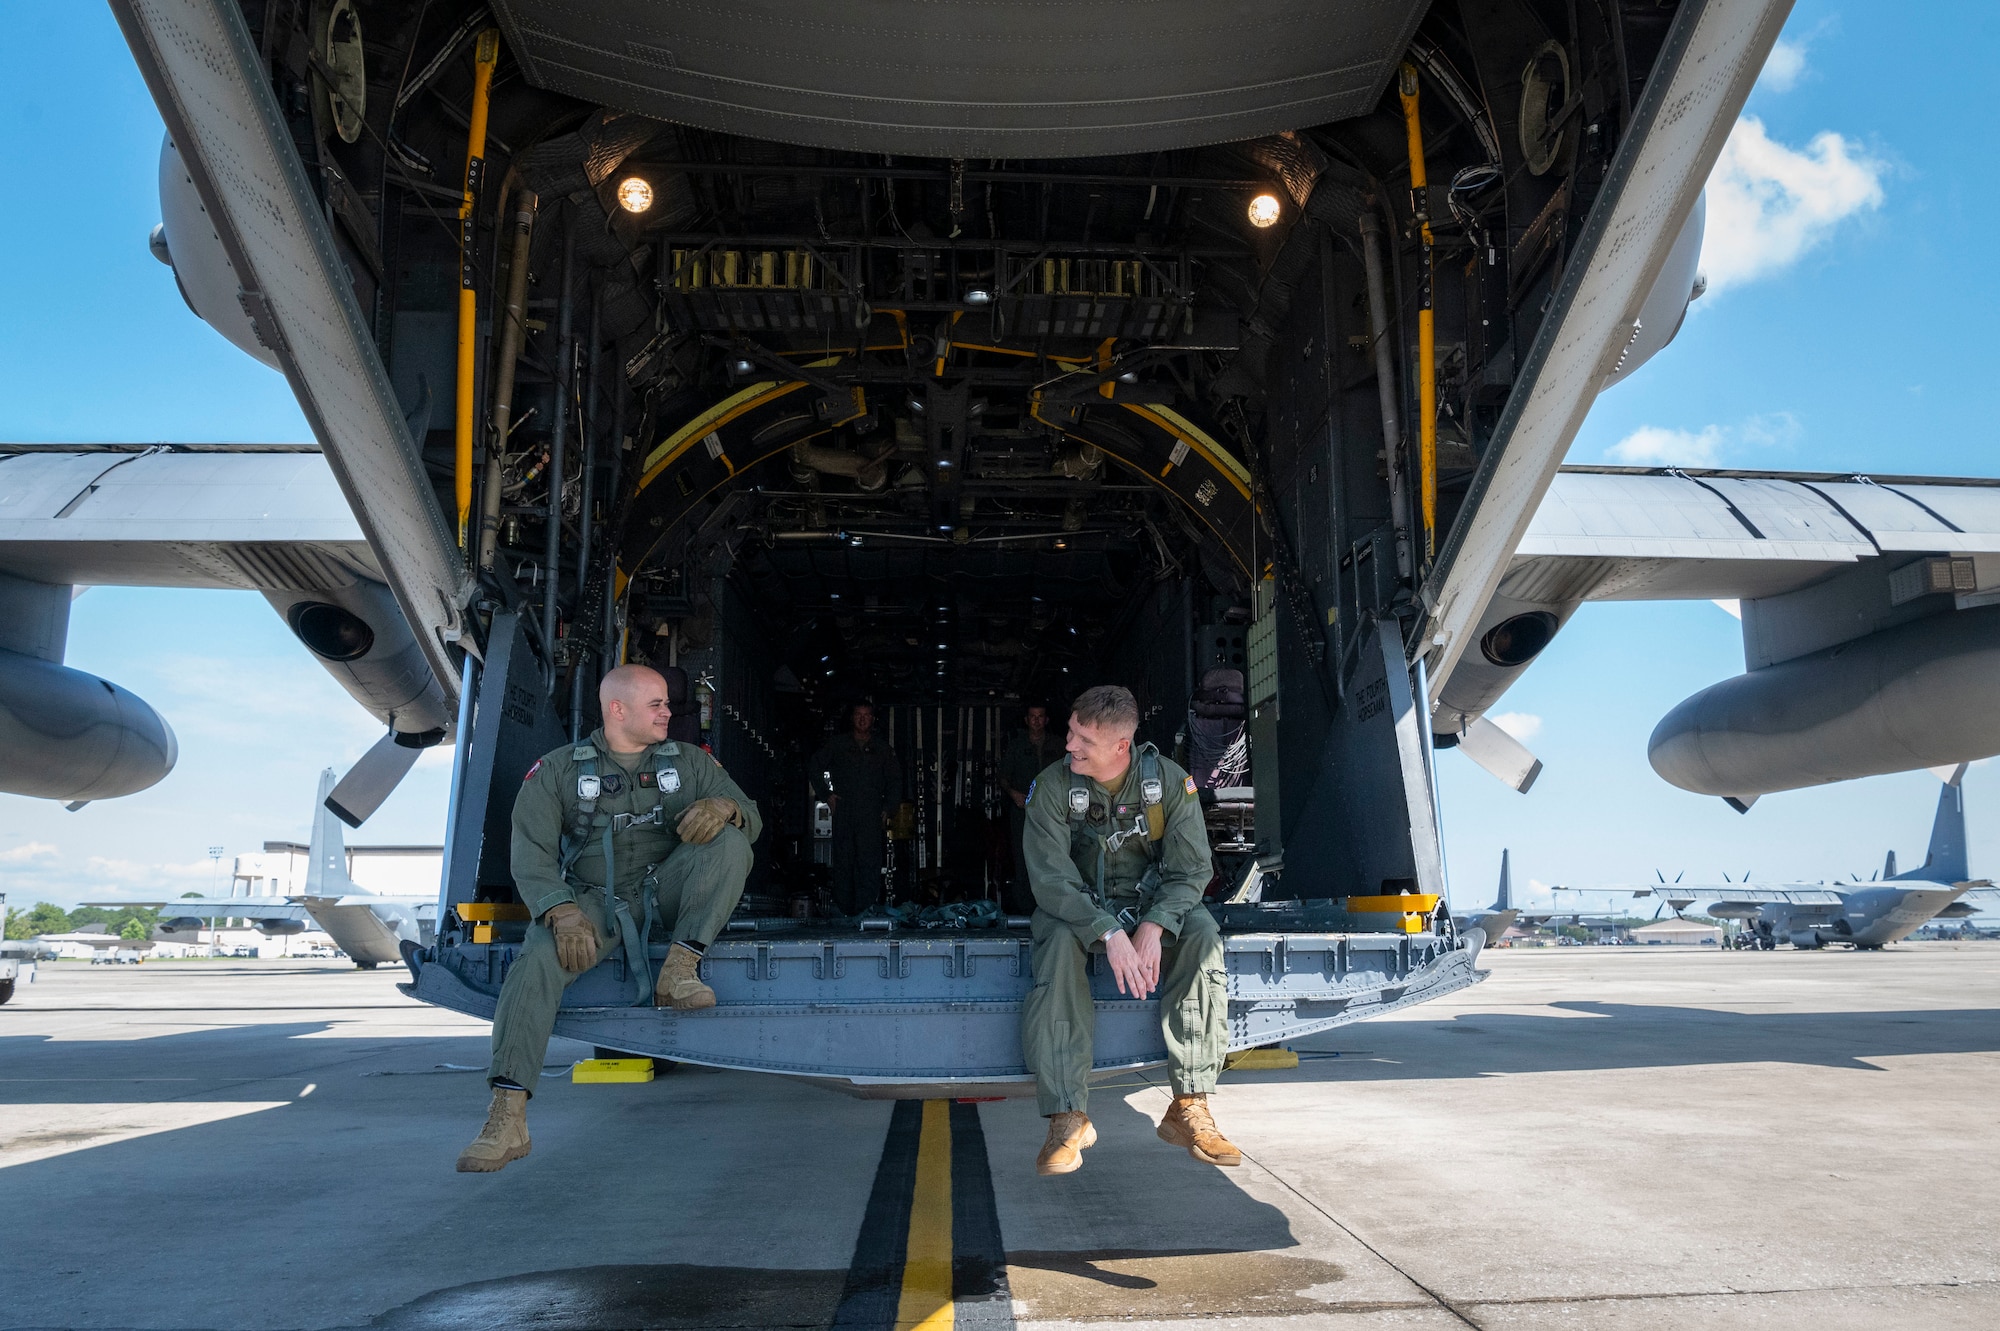 U.S. Air Force Master Sgt. Adrian Garcia, left, 19th Special Operations Squadron operations superintendent, and U.S. Air Force Master Sgt. Frank Veres, right, 492nd Special Operations Training Support Squadron MC-130H program manager, check harness lengths for the MC-130H Combat Talon II final flight under the 492nd Special Operations Wing at Hurlburt Field, Florida, May 31, 2022.